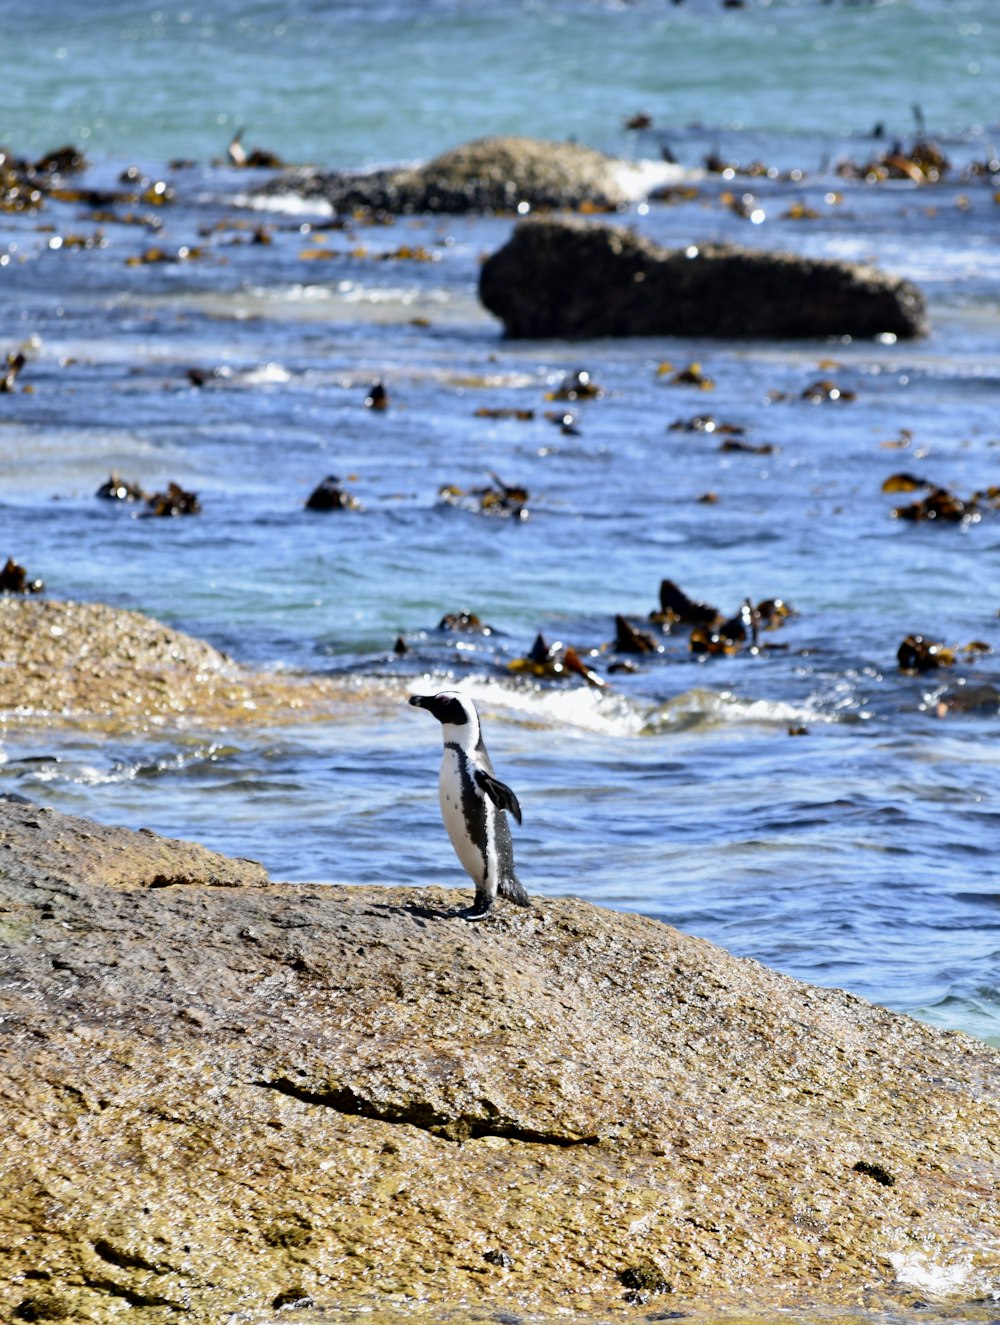 penguin on brown rock near body of water during daytime